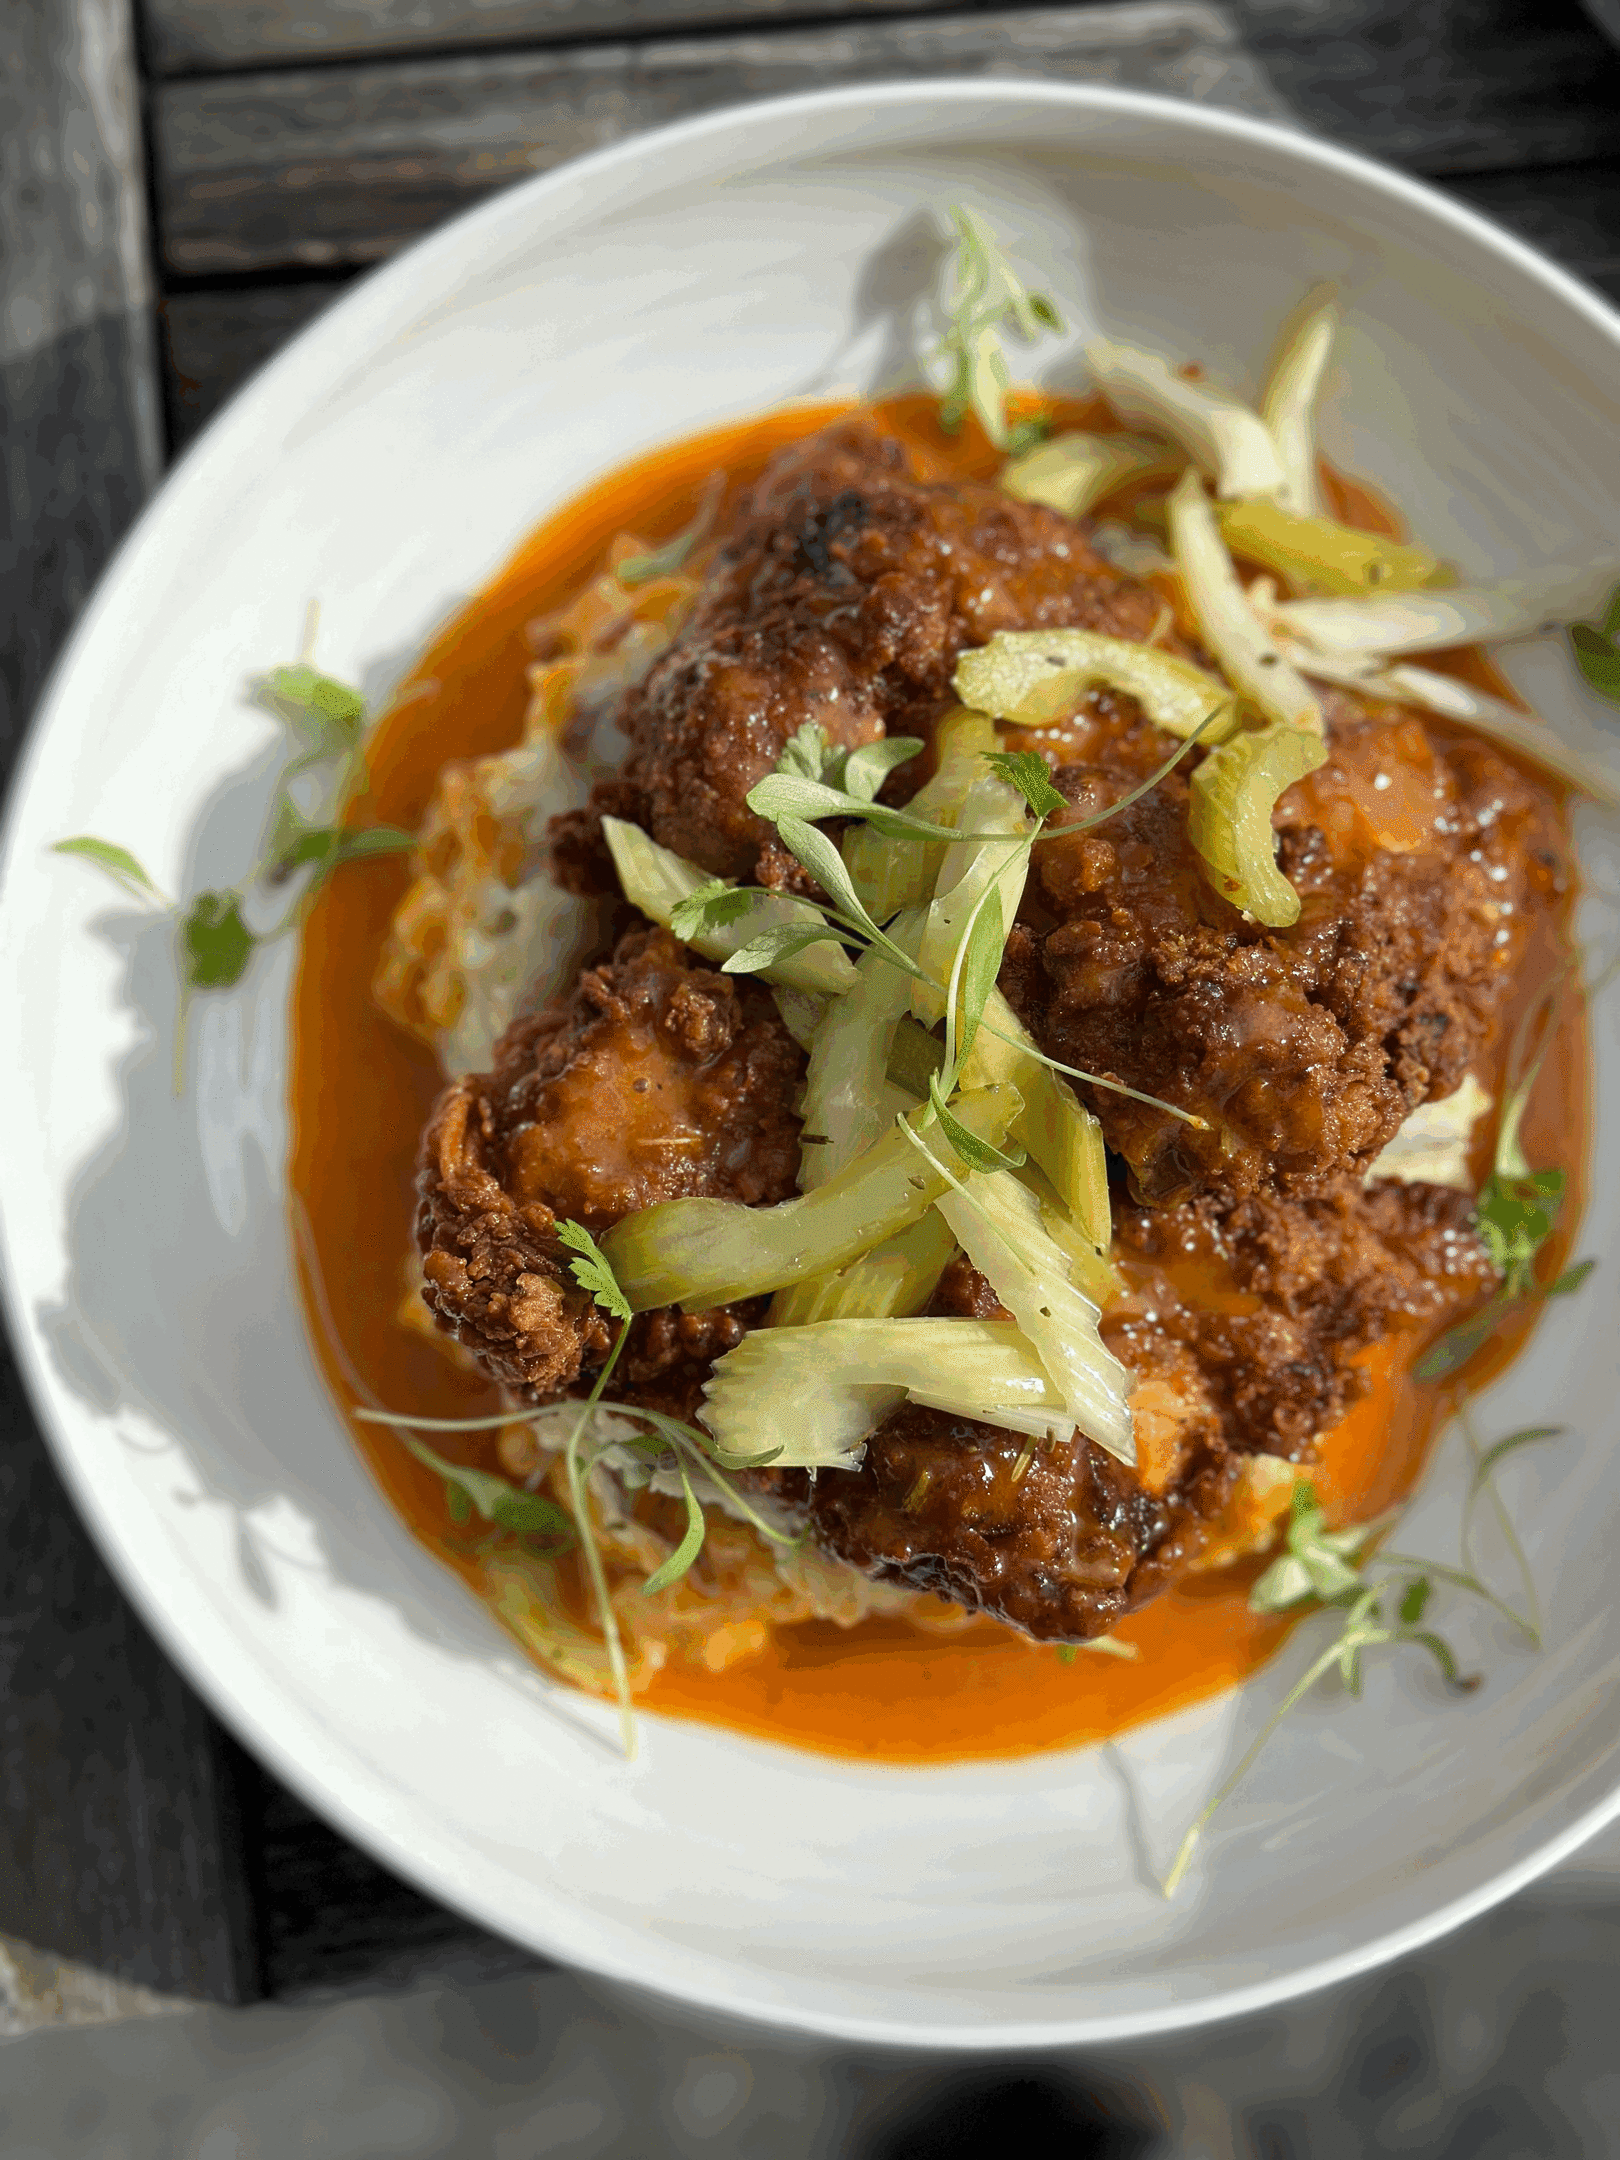 Spring Menus Are Here!

FEATURING
Buttermilk Fried Chicken
Red Bliss Whipped Potatoes, Pickled Celery, Buttery Hot Sauce